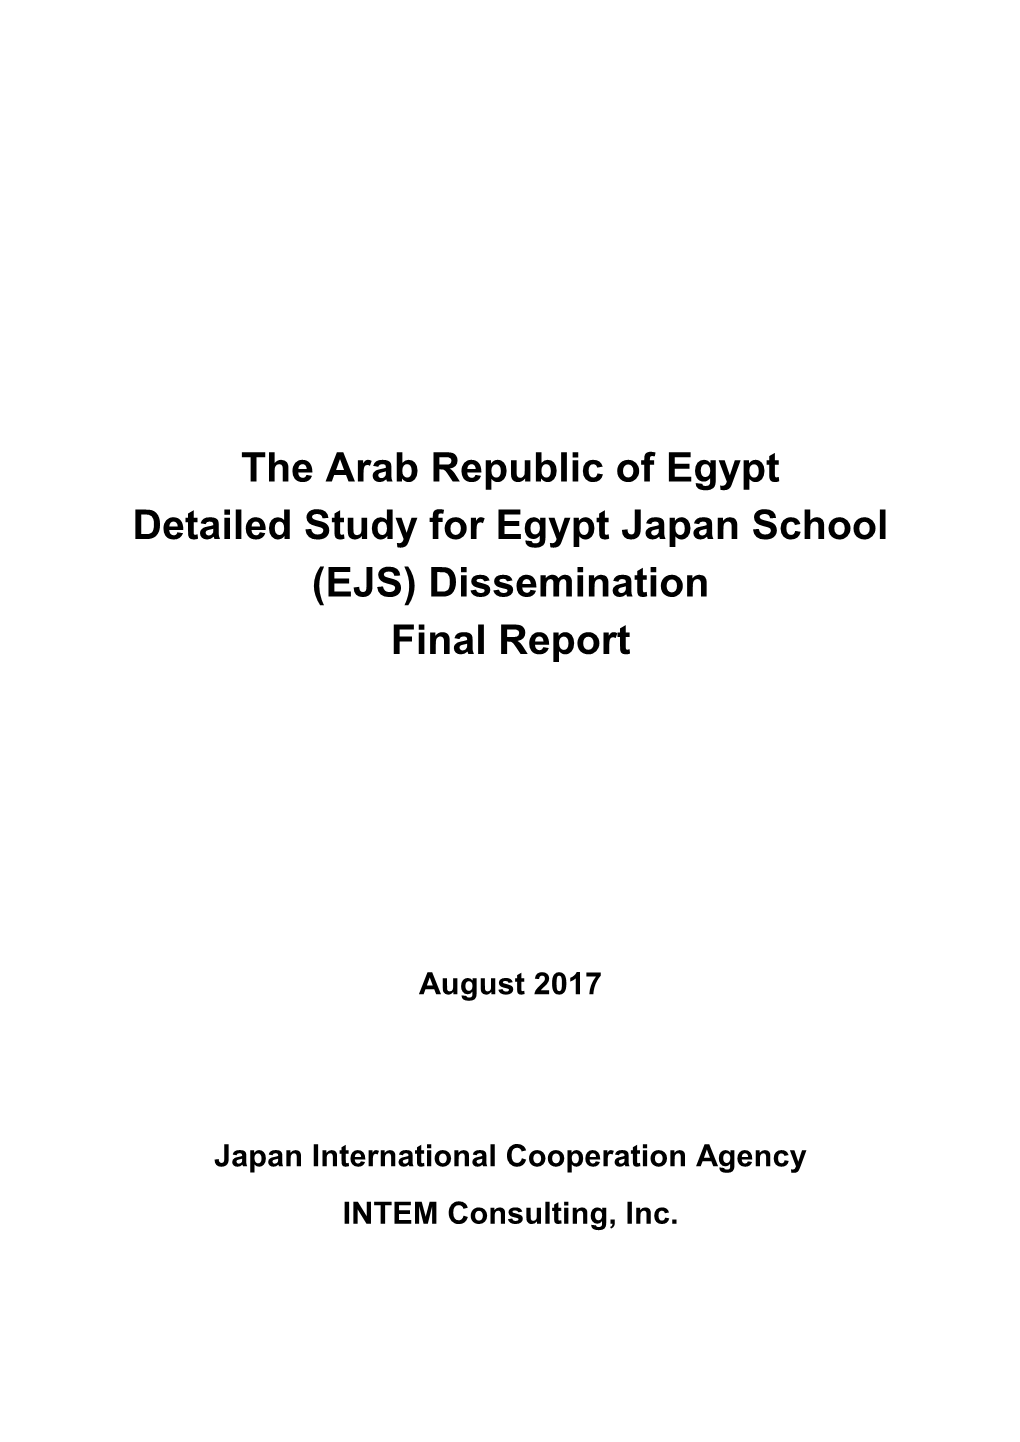 The Arab Republic of Egypt Detailed Study for Egypt Japan School (EJS) Dissemination Final Report